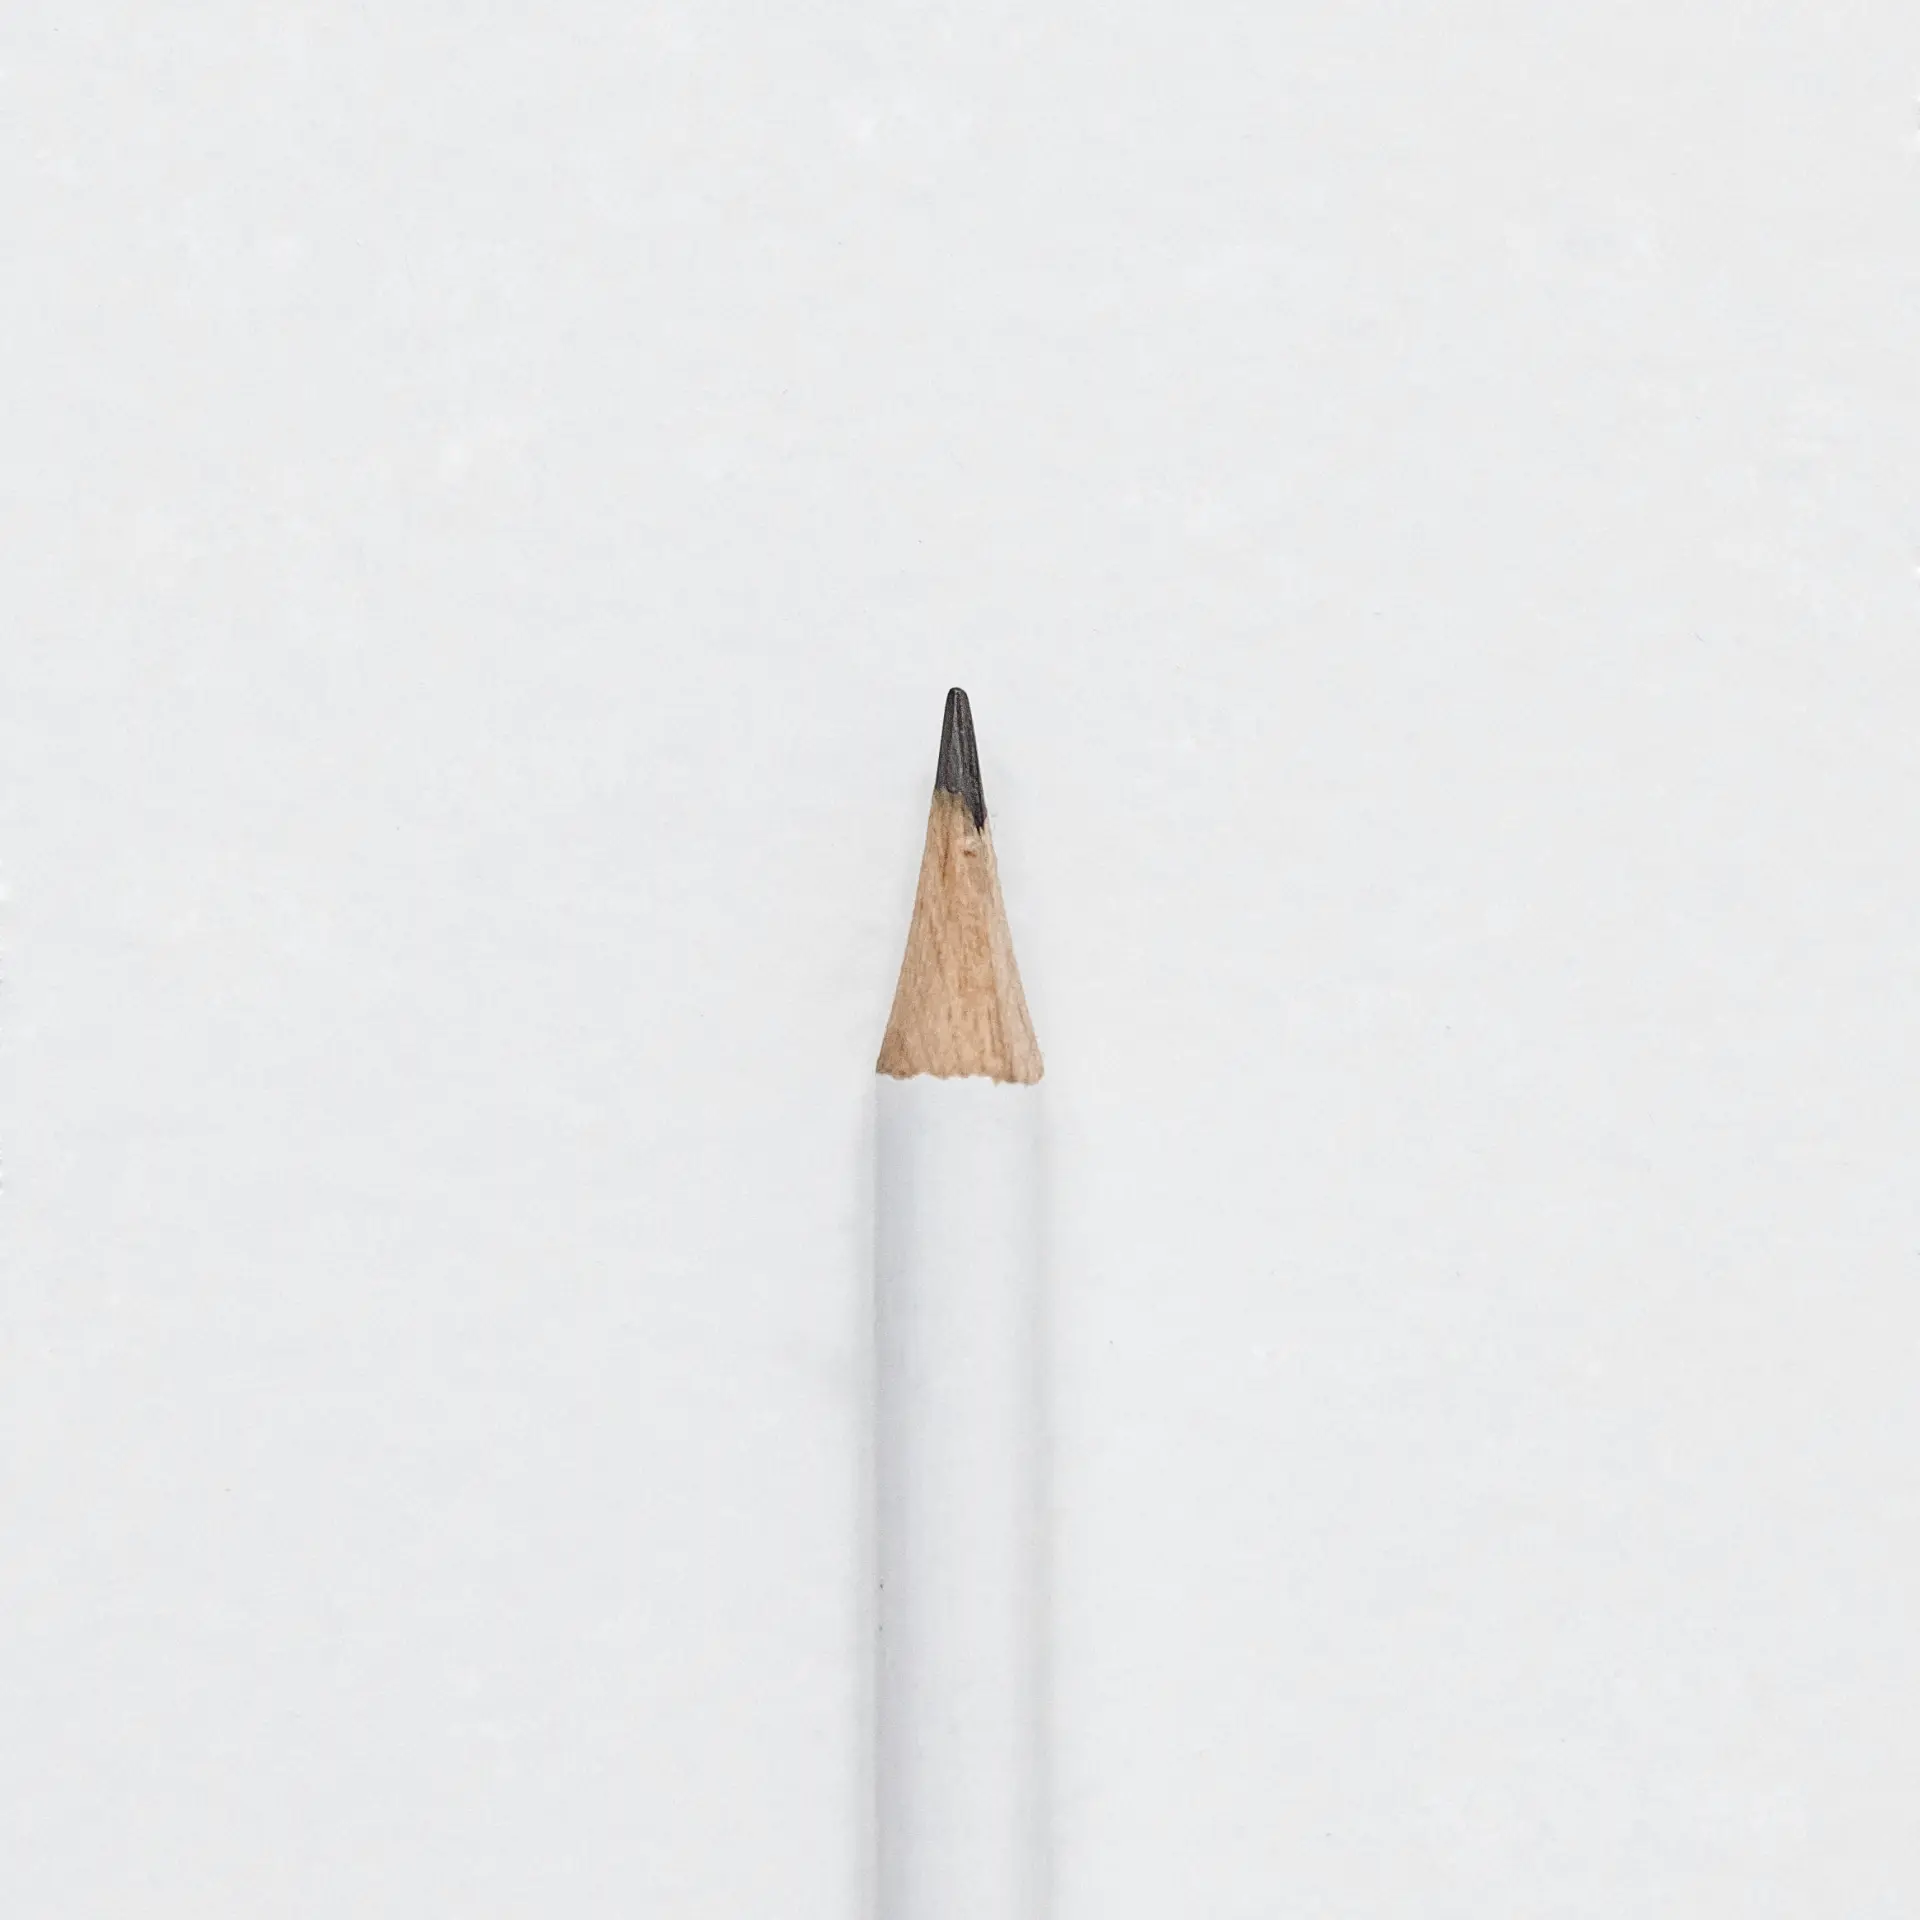 Pencil as a metaphor for getting in touch